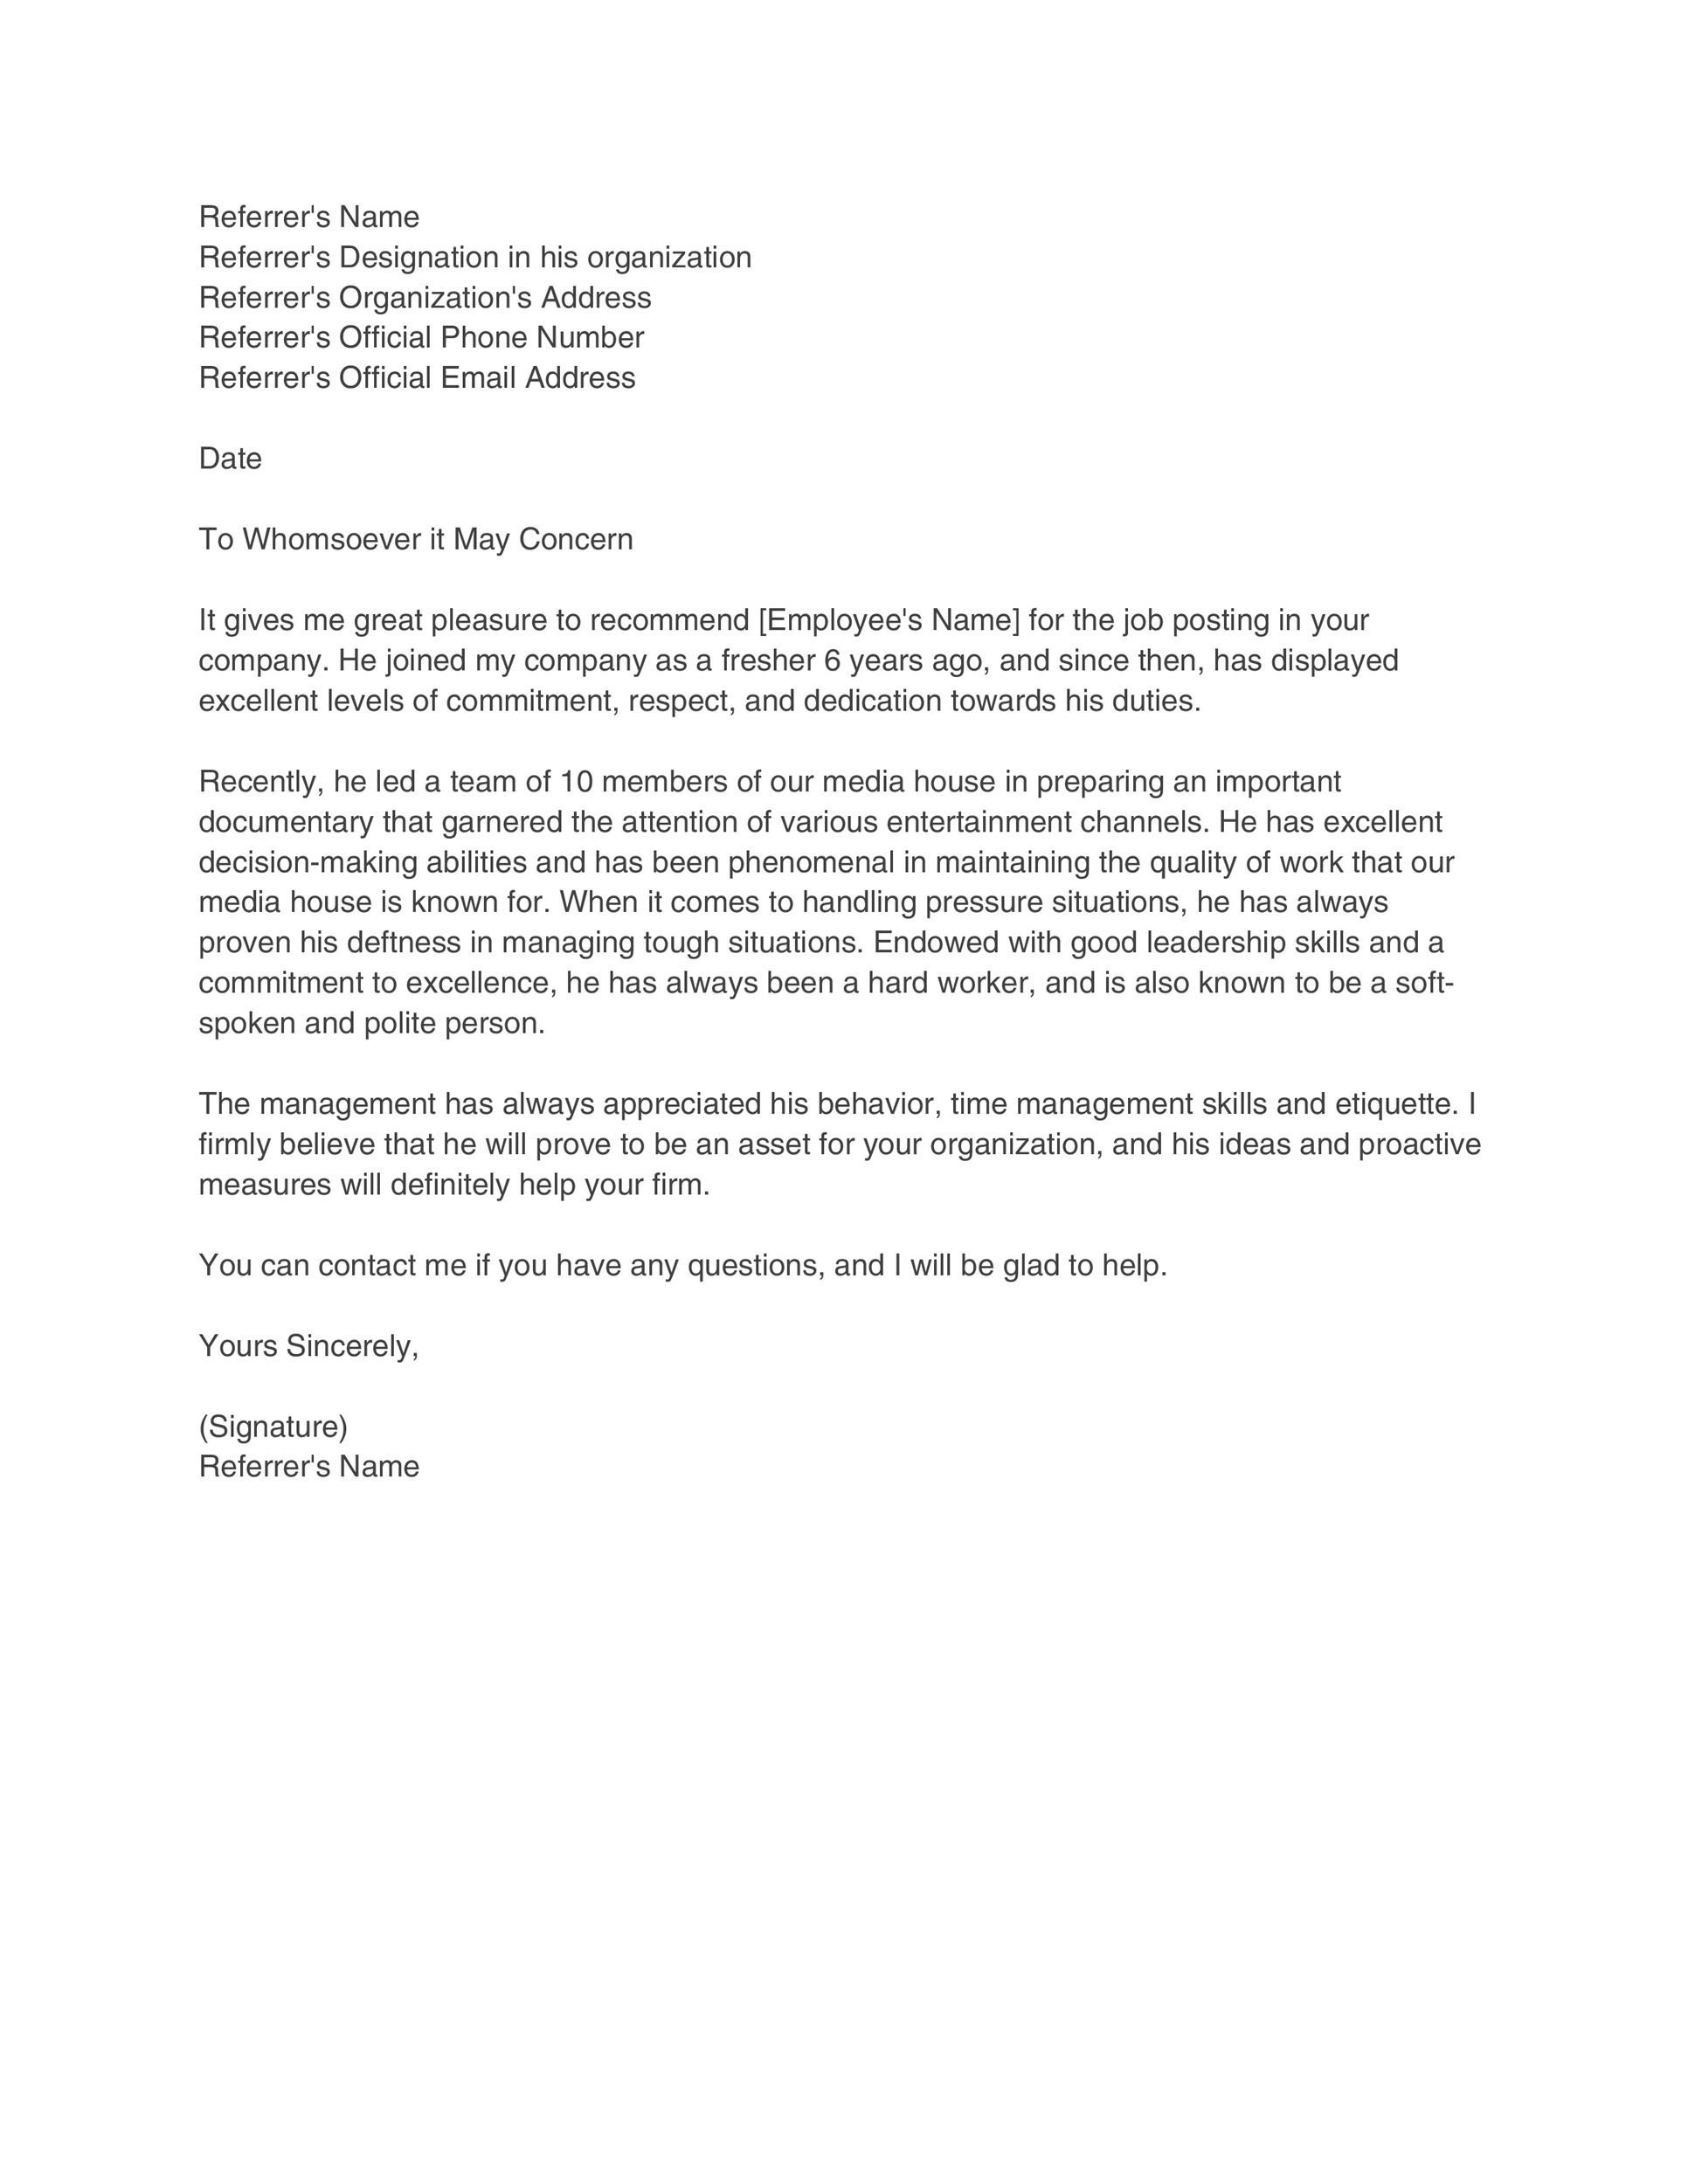 Letter Of Recommendation Template For Employee from templatelab.com